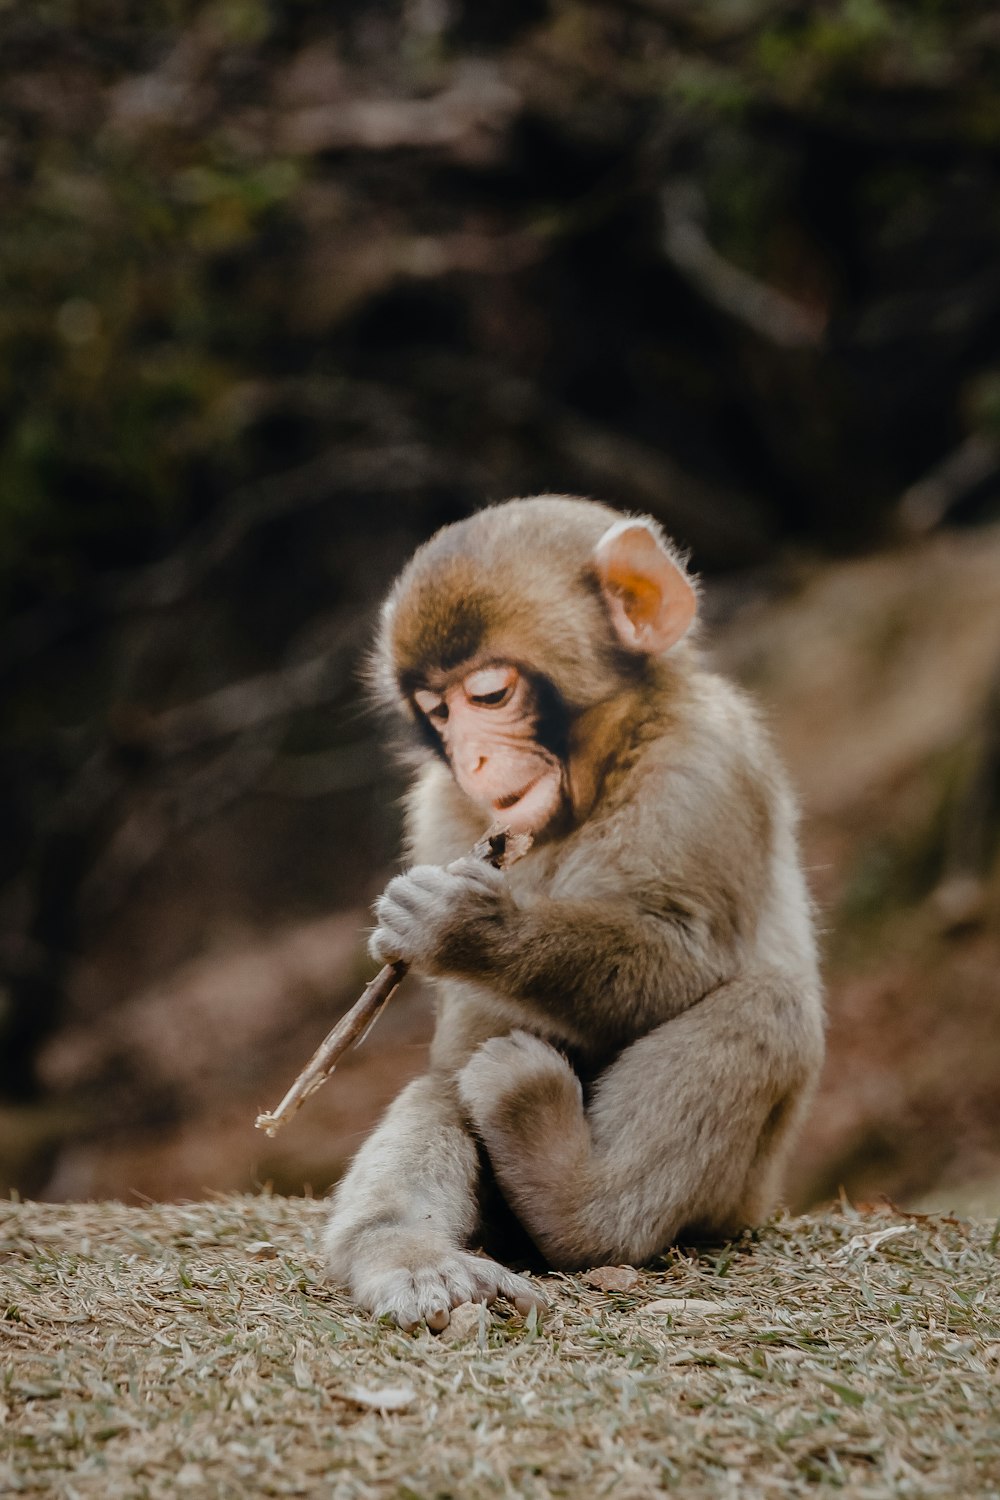 Cute Monkey Pictures Download Free Images On Unsplash